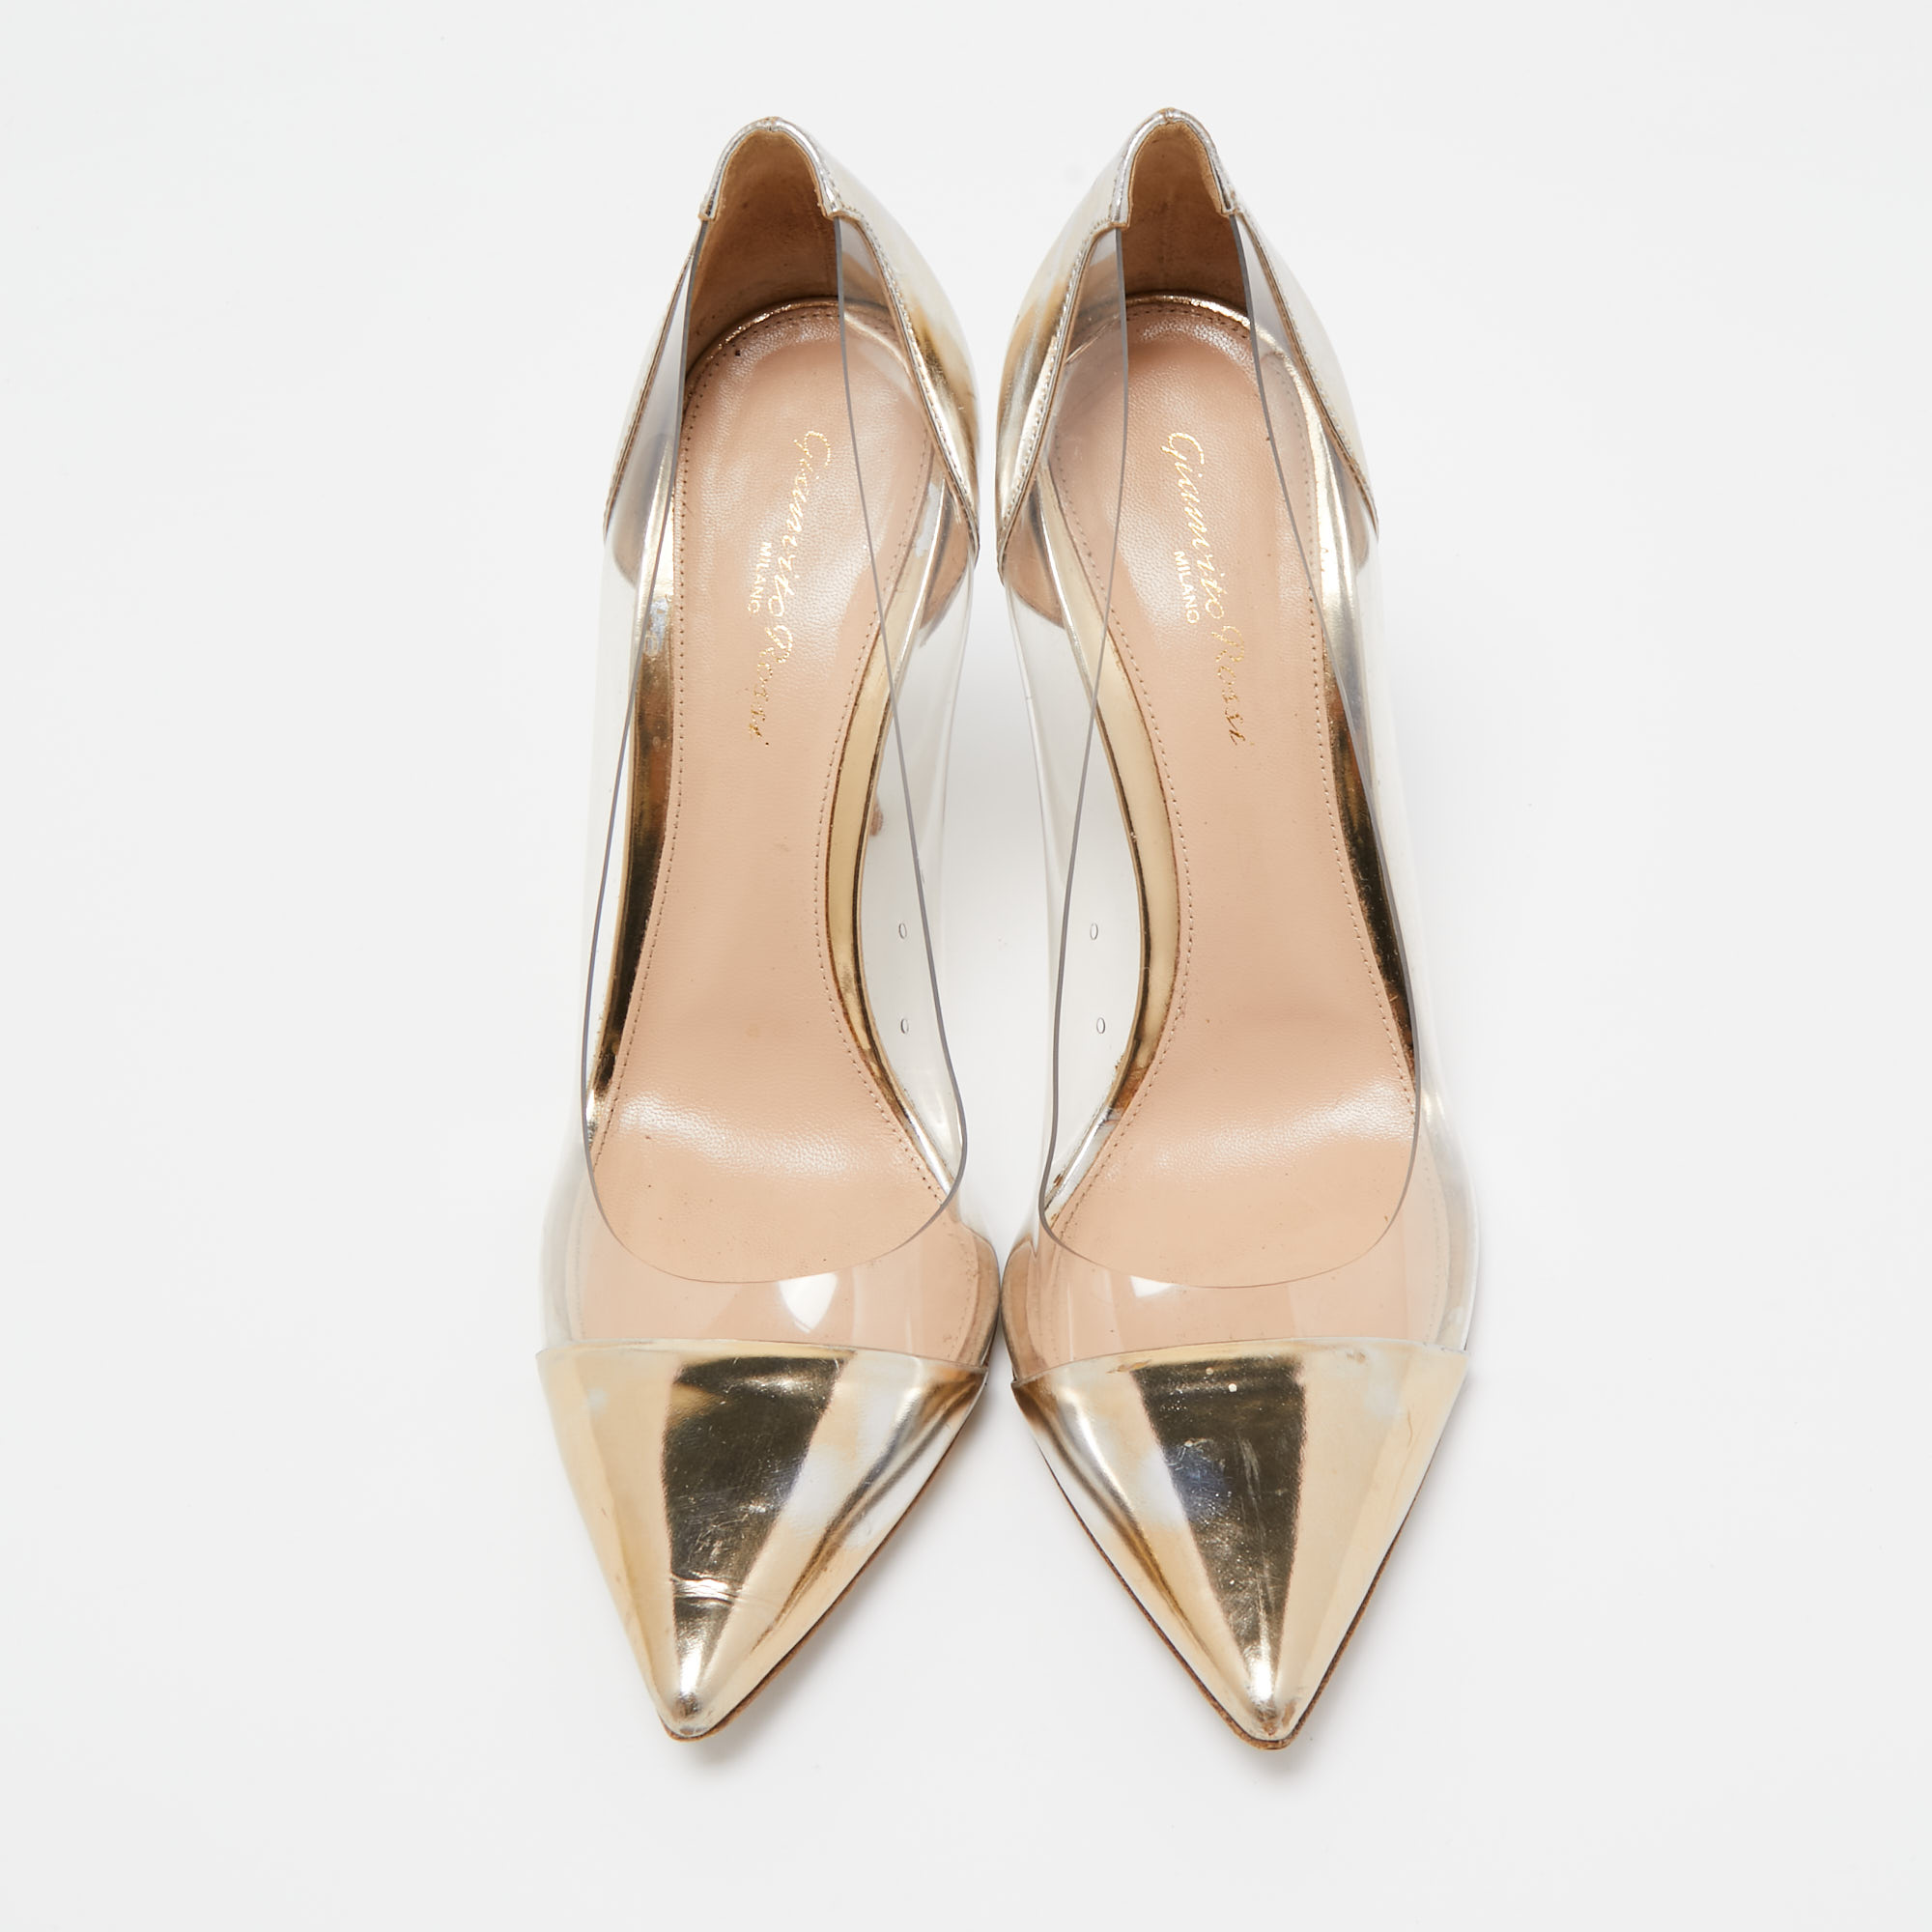 Gianvito Rossi Metallic Gold Foil Leather And PVC Plexi Pointed Toe Pumps Size 40